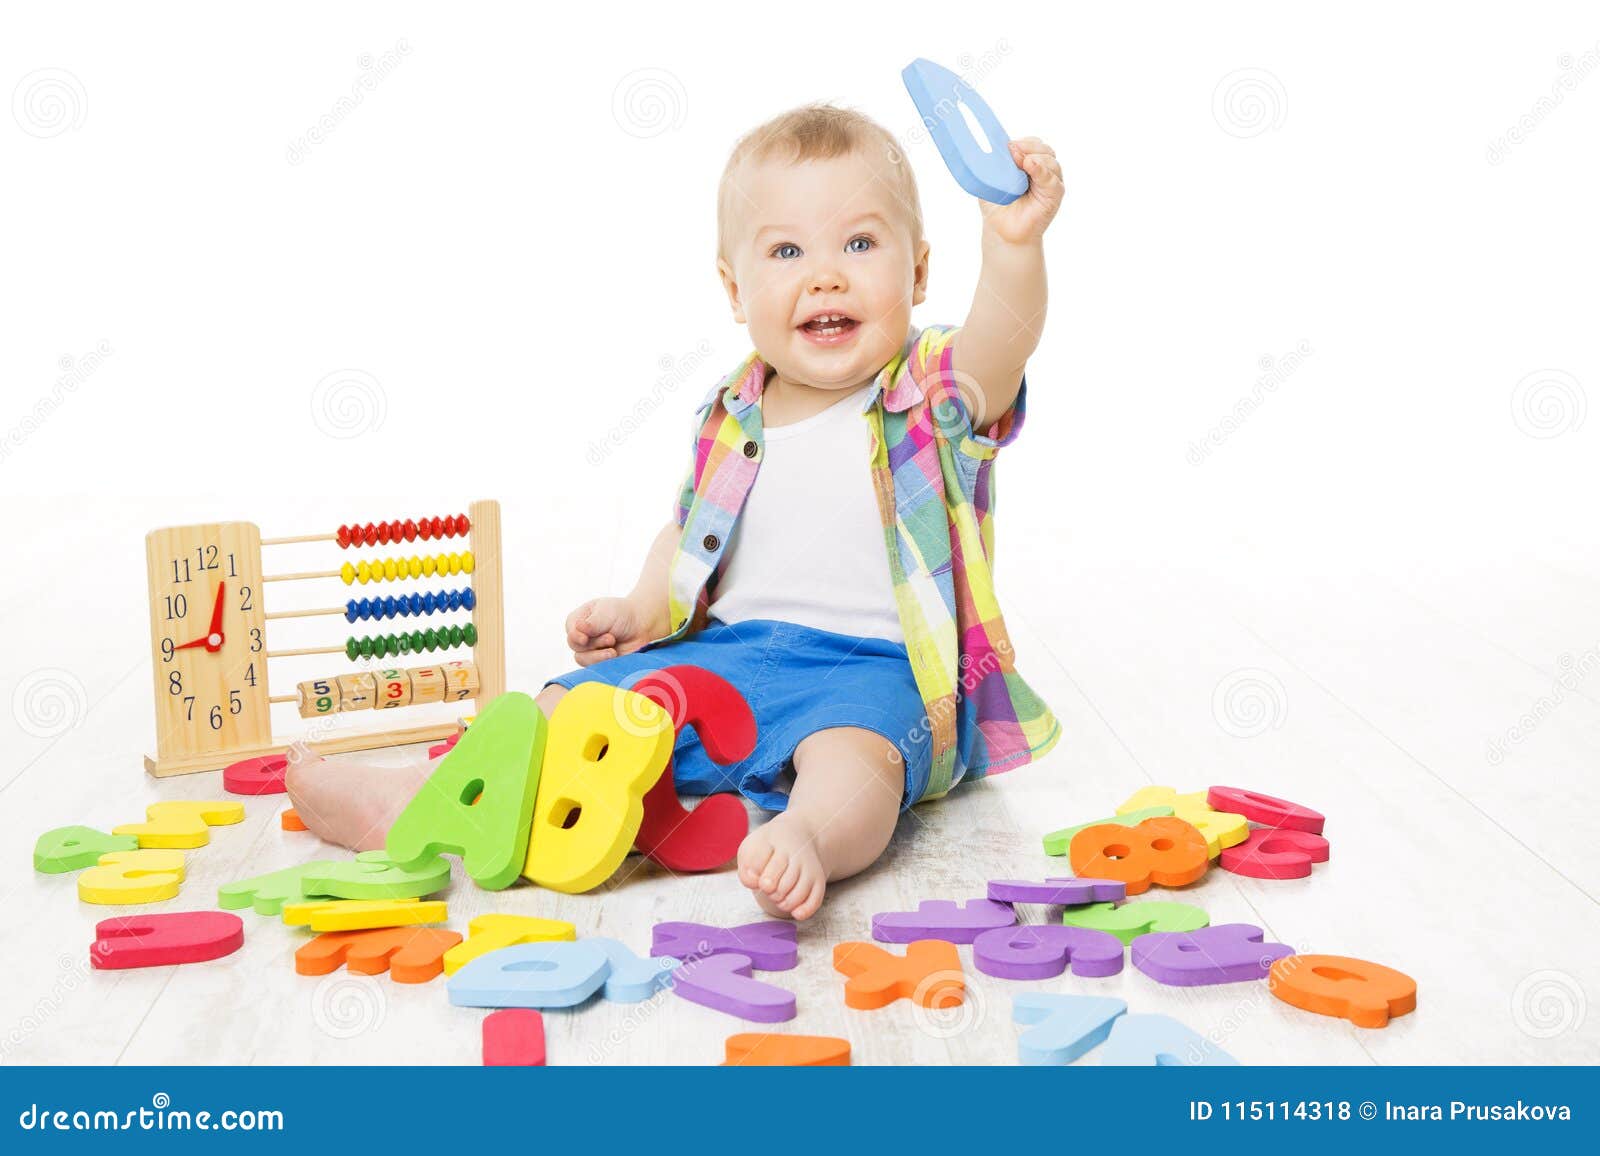 baby alphabet and math toys, child playing abacus abc letters